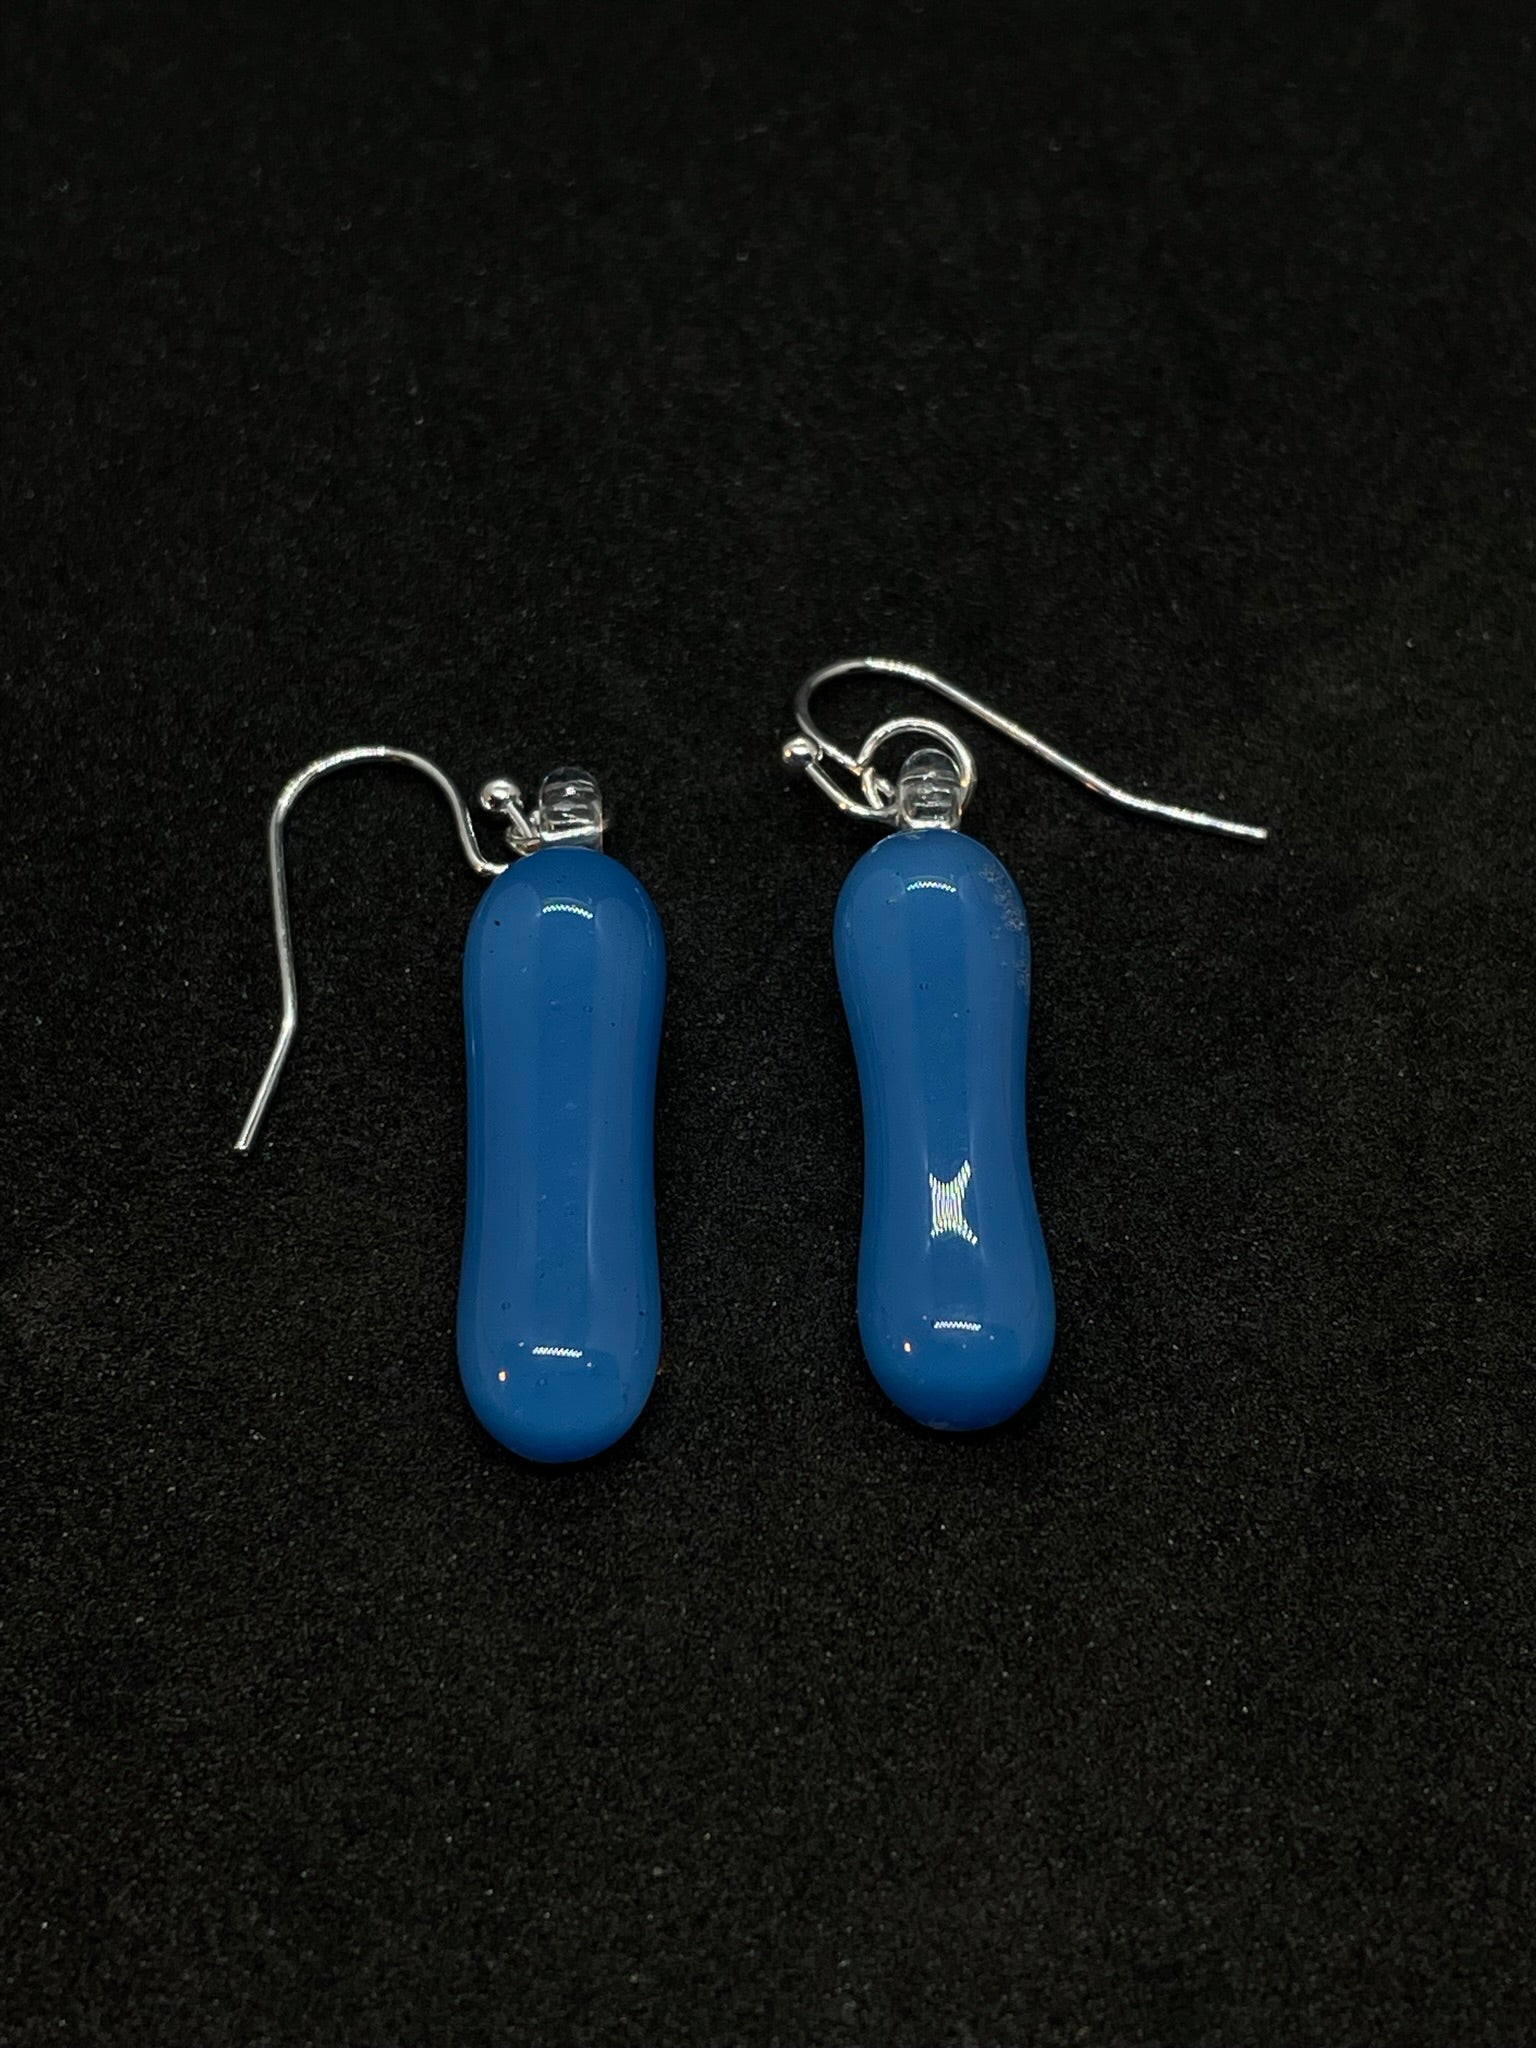 Beautiful blue drop earrings made with fused glass